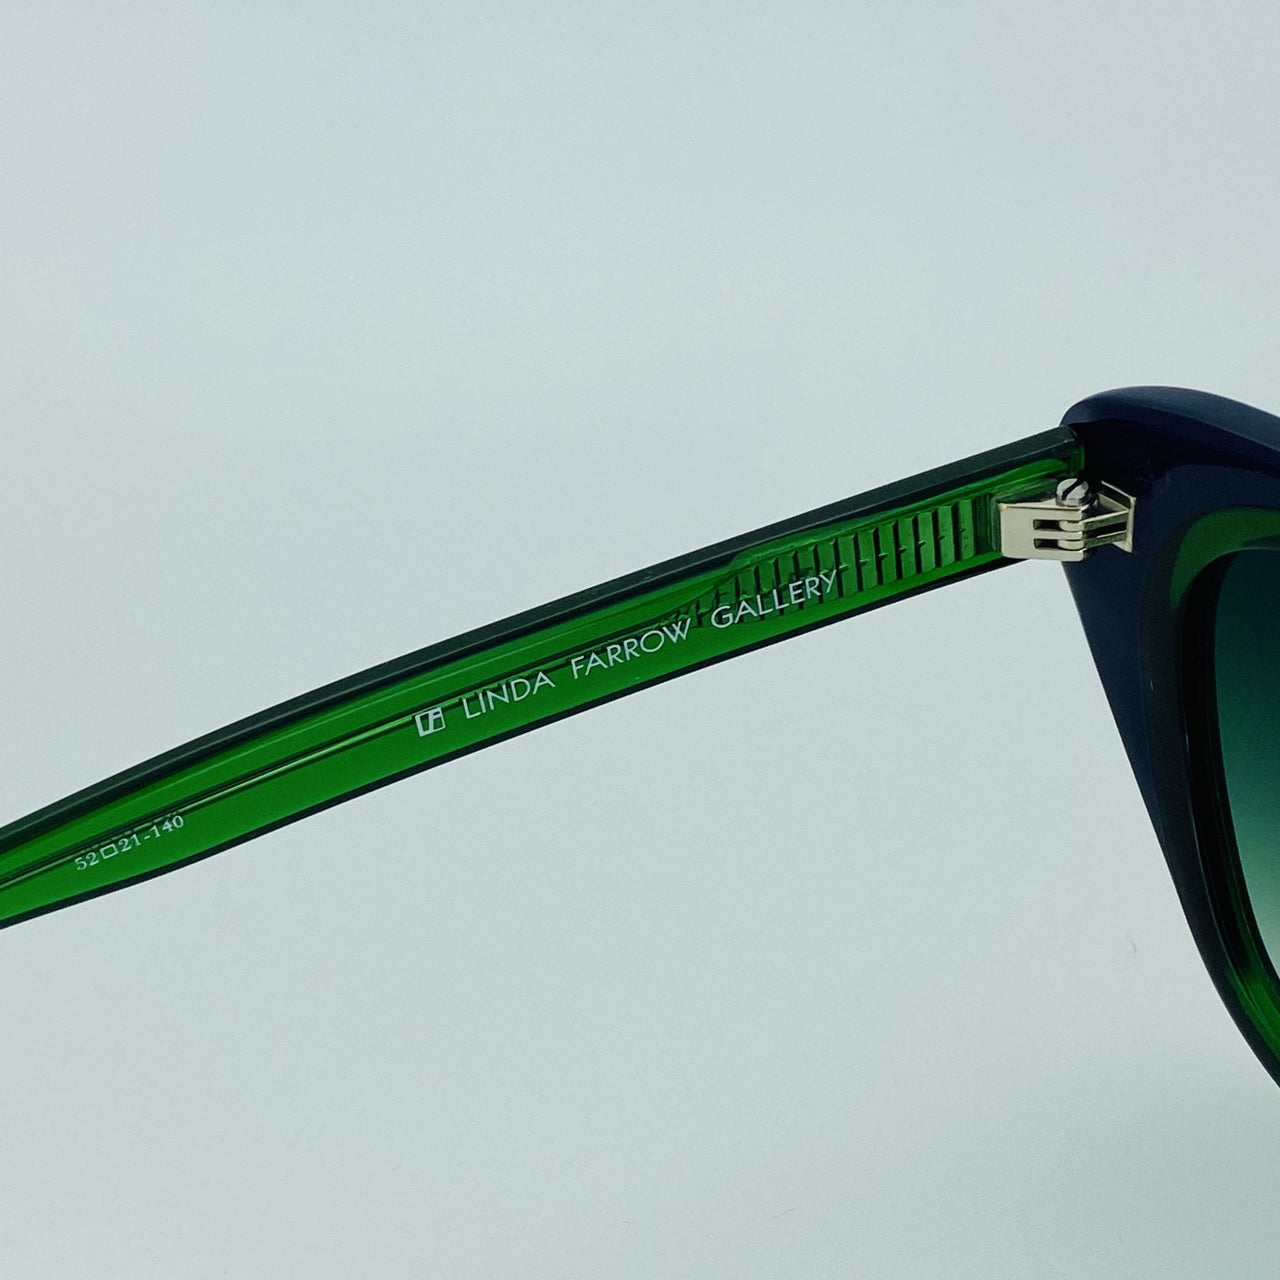 Erdem Women Sunglasses Cat Eye Navy Green with Green Gradient Lenses Category 3 EDM18C3SUN - Watches & Crystals